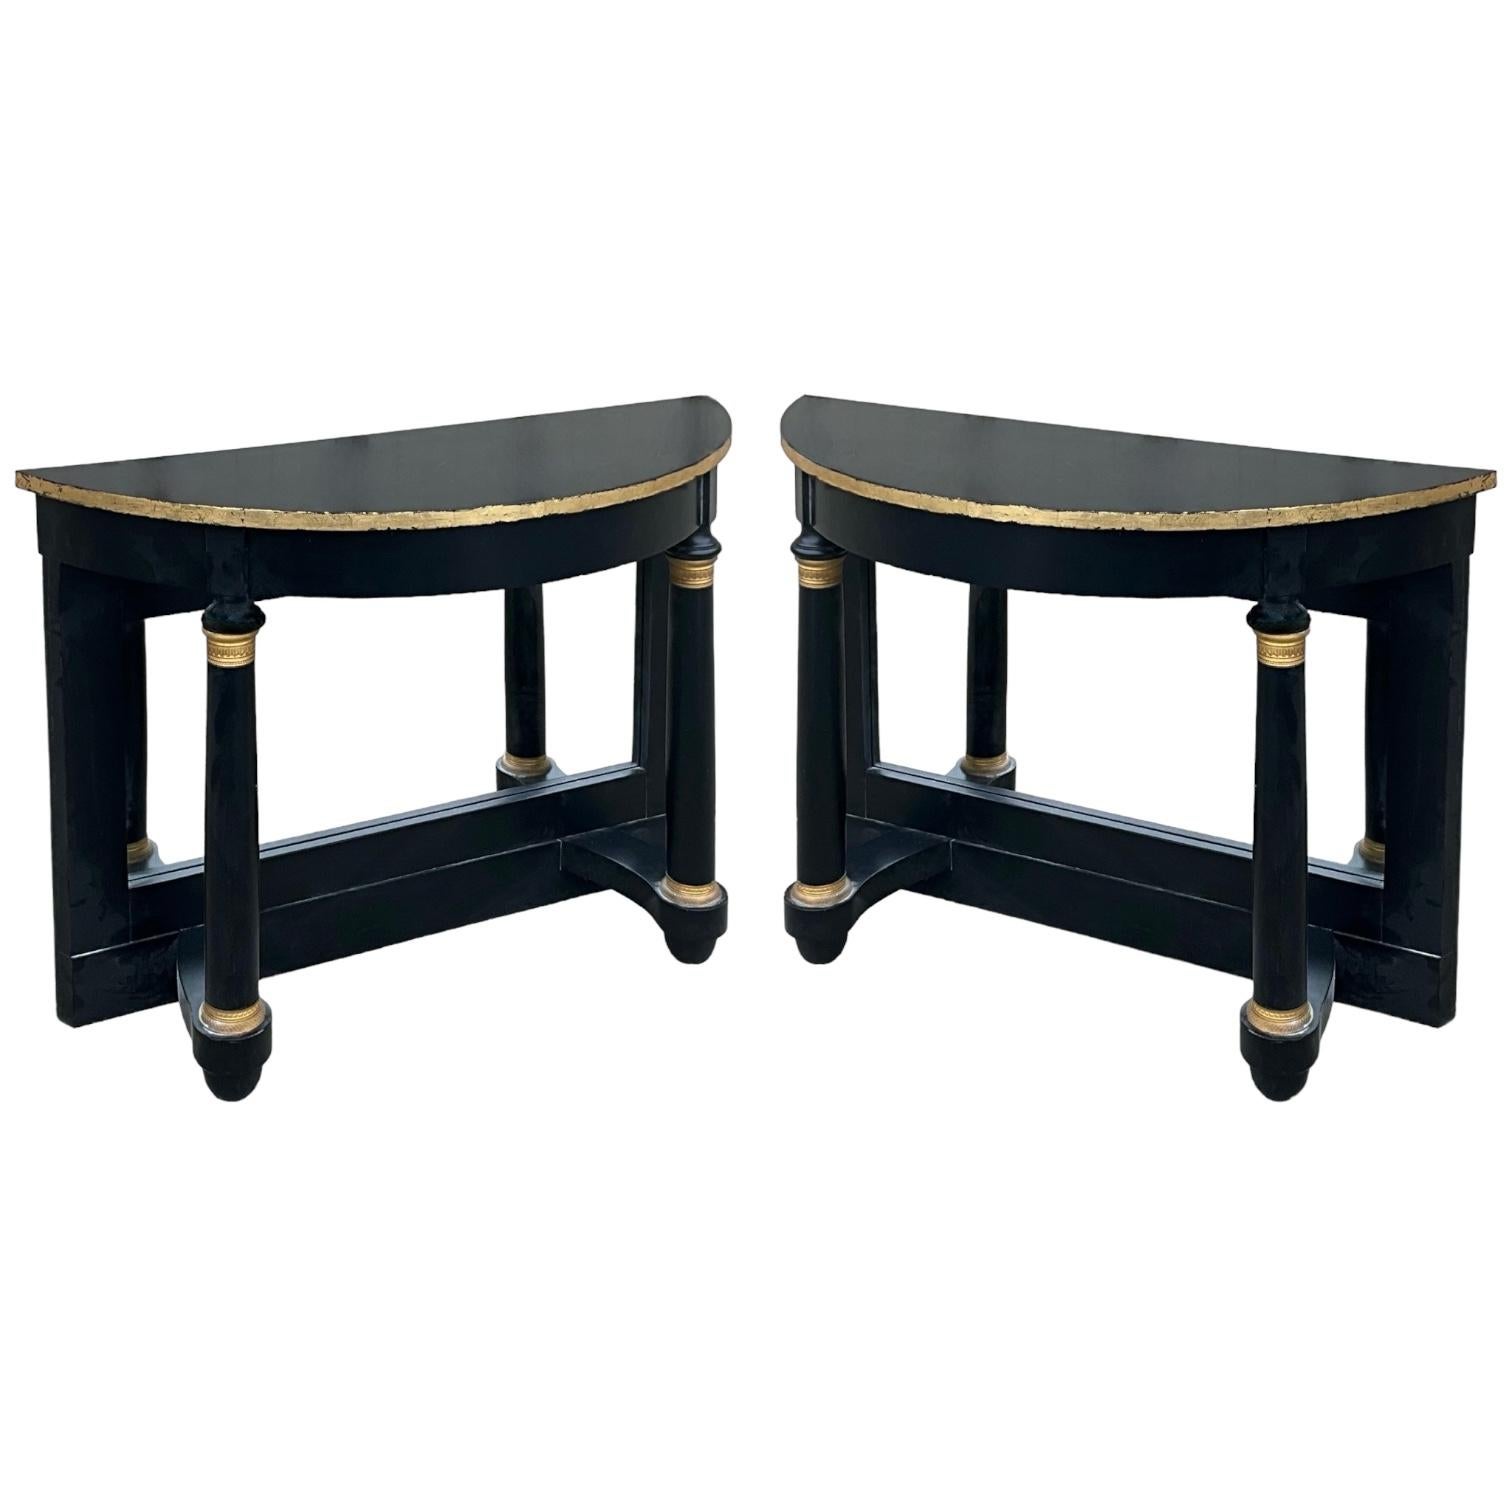 French Neo-Classical Style Maison Jansen Black & Gilt Bronze Console Tables -S/2 For Sale 2